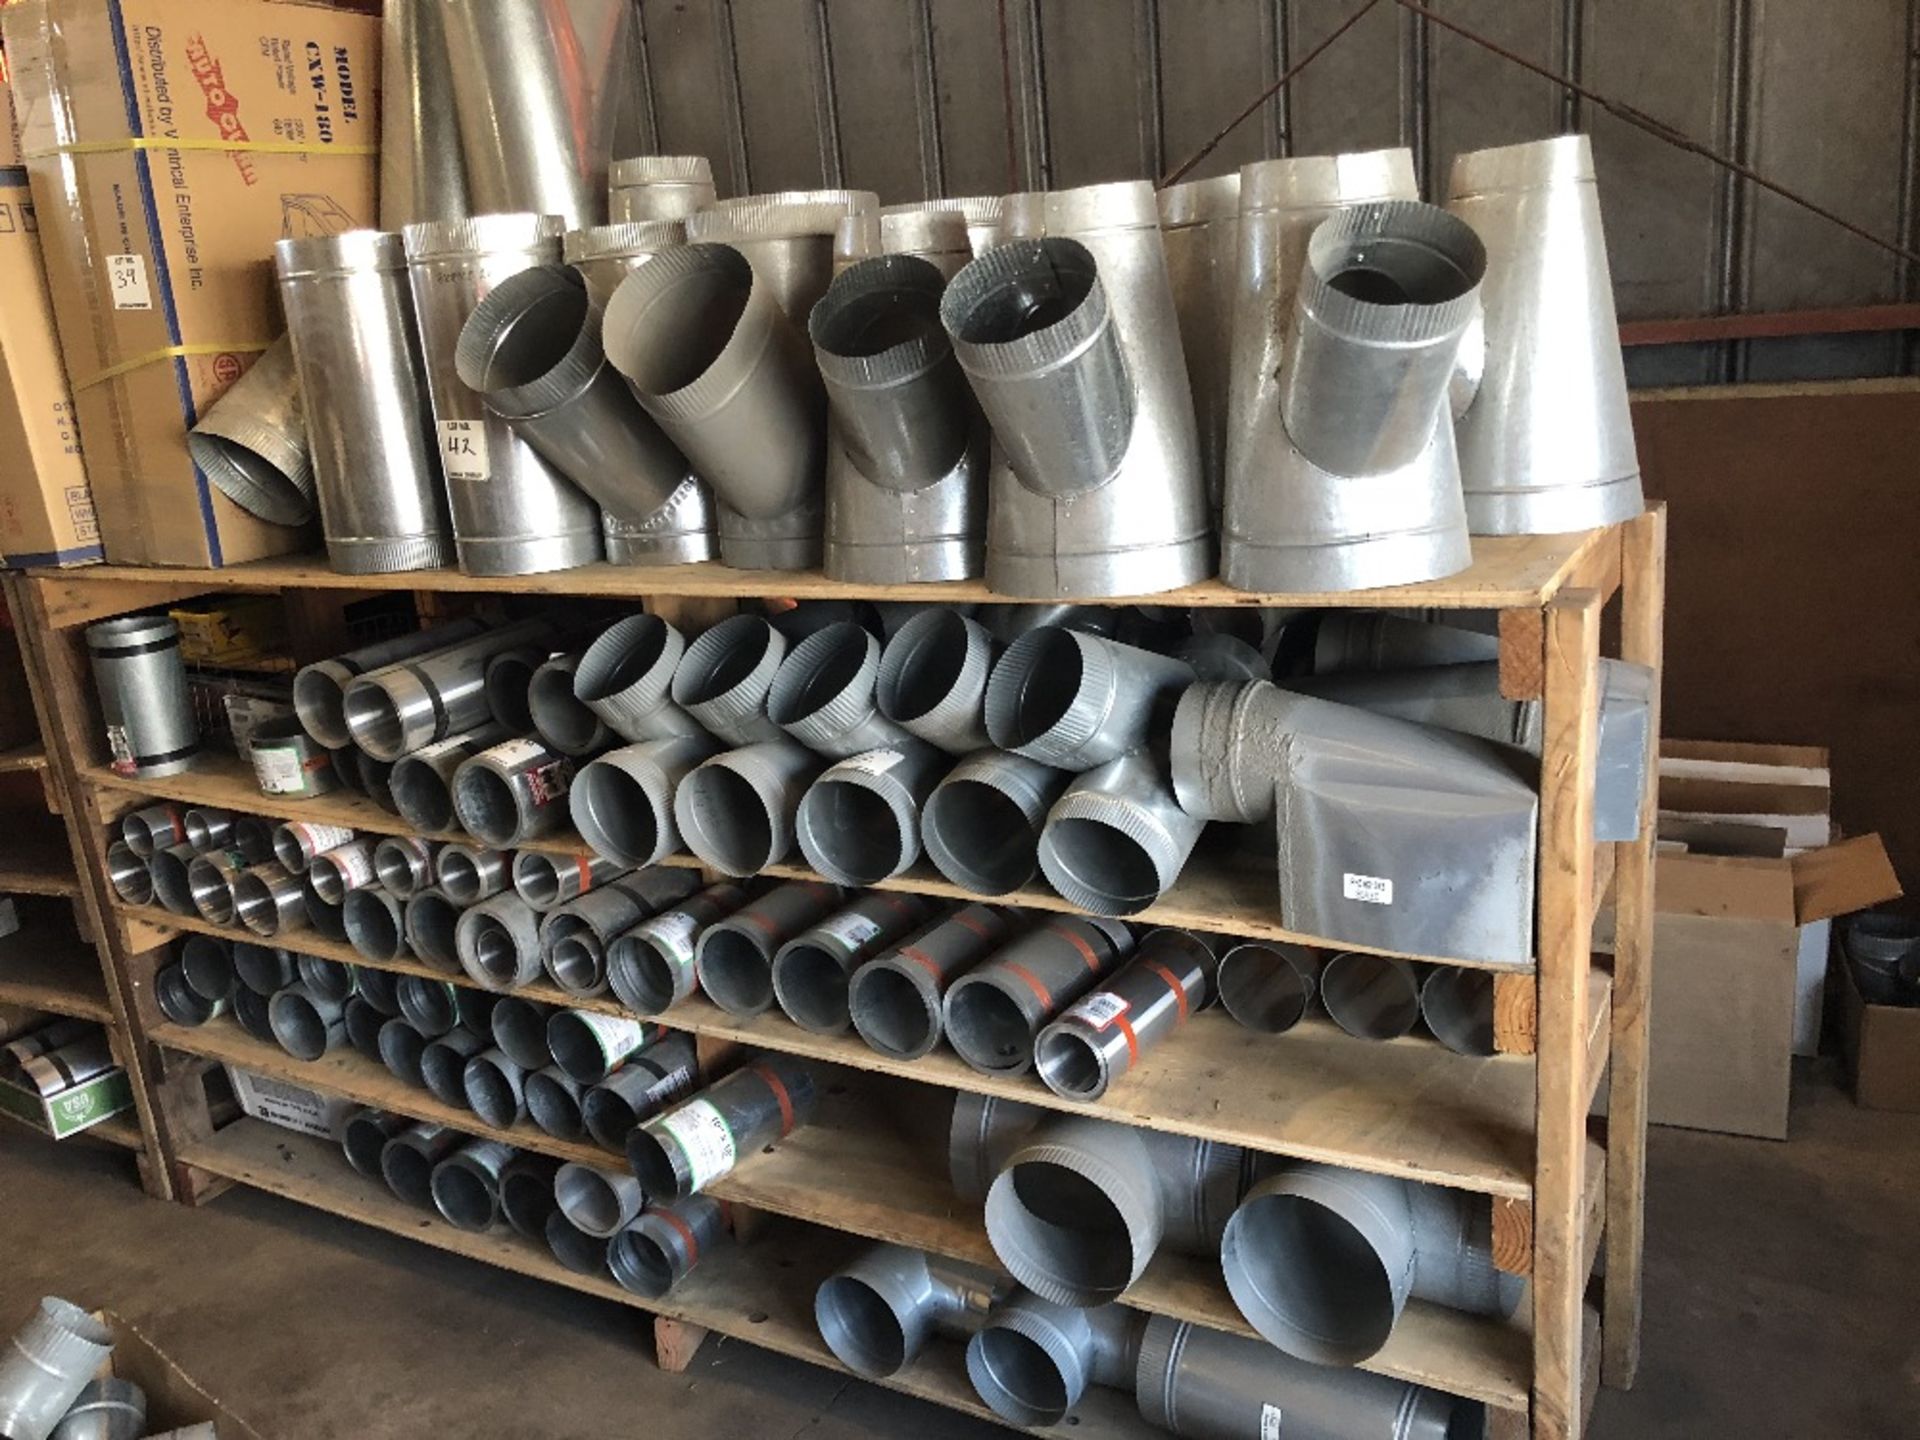 MISCELLANEOUS DUCTING, MISCELLANEOUS GALVANIZED SHEETS